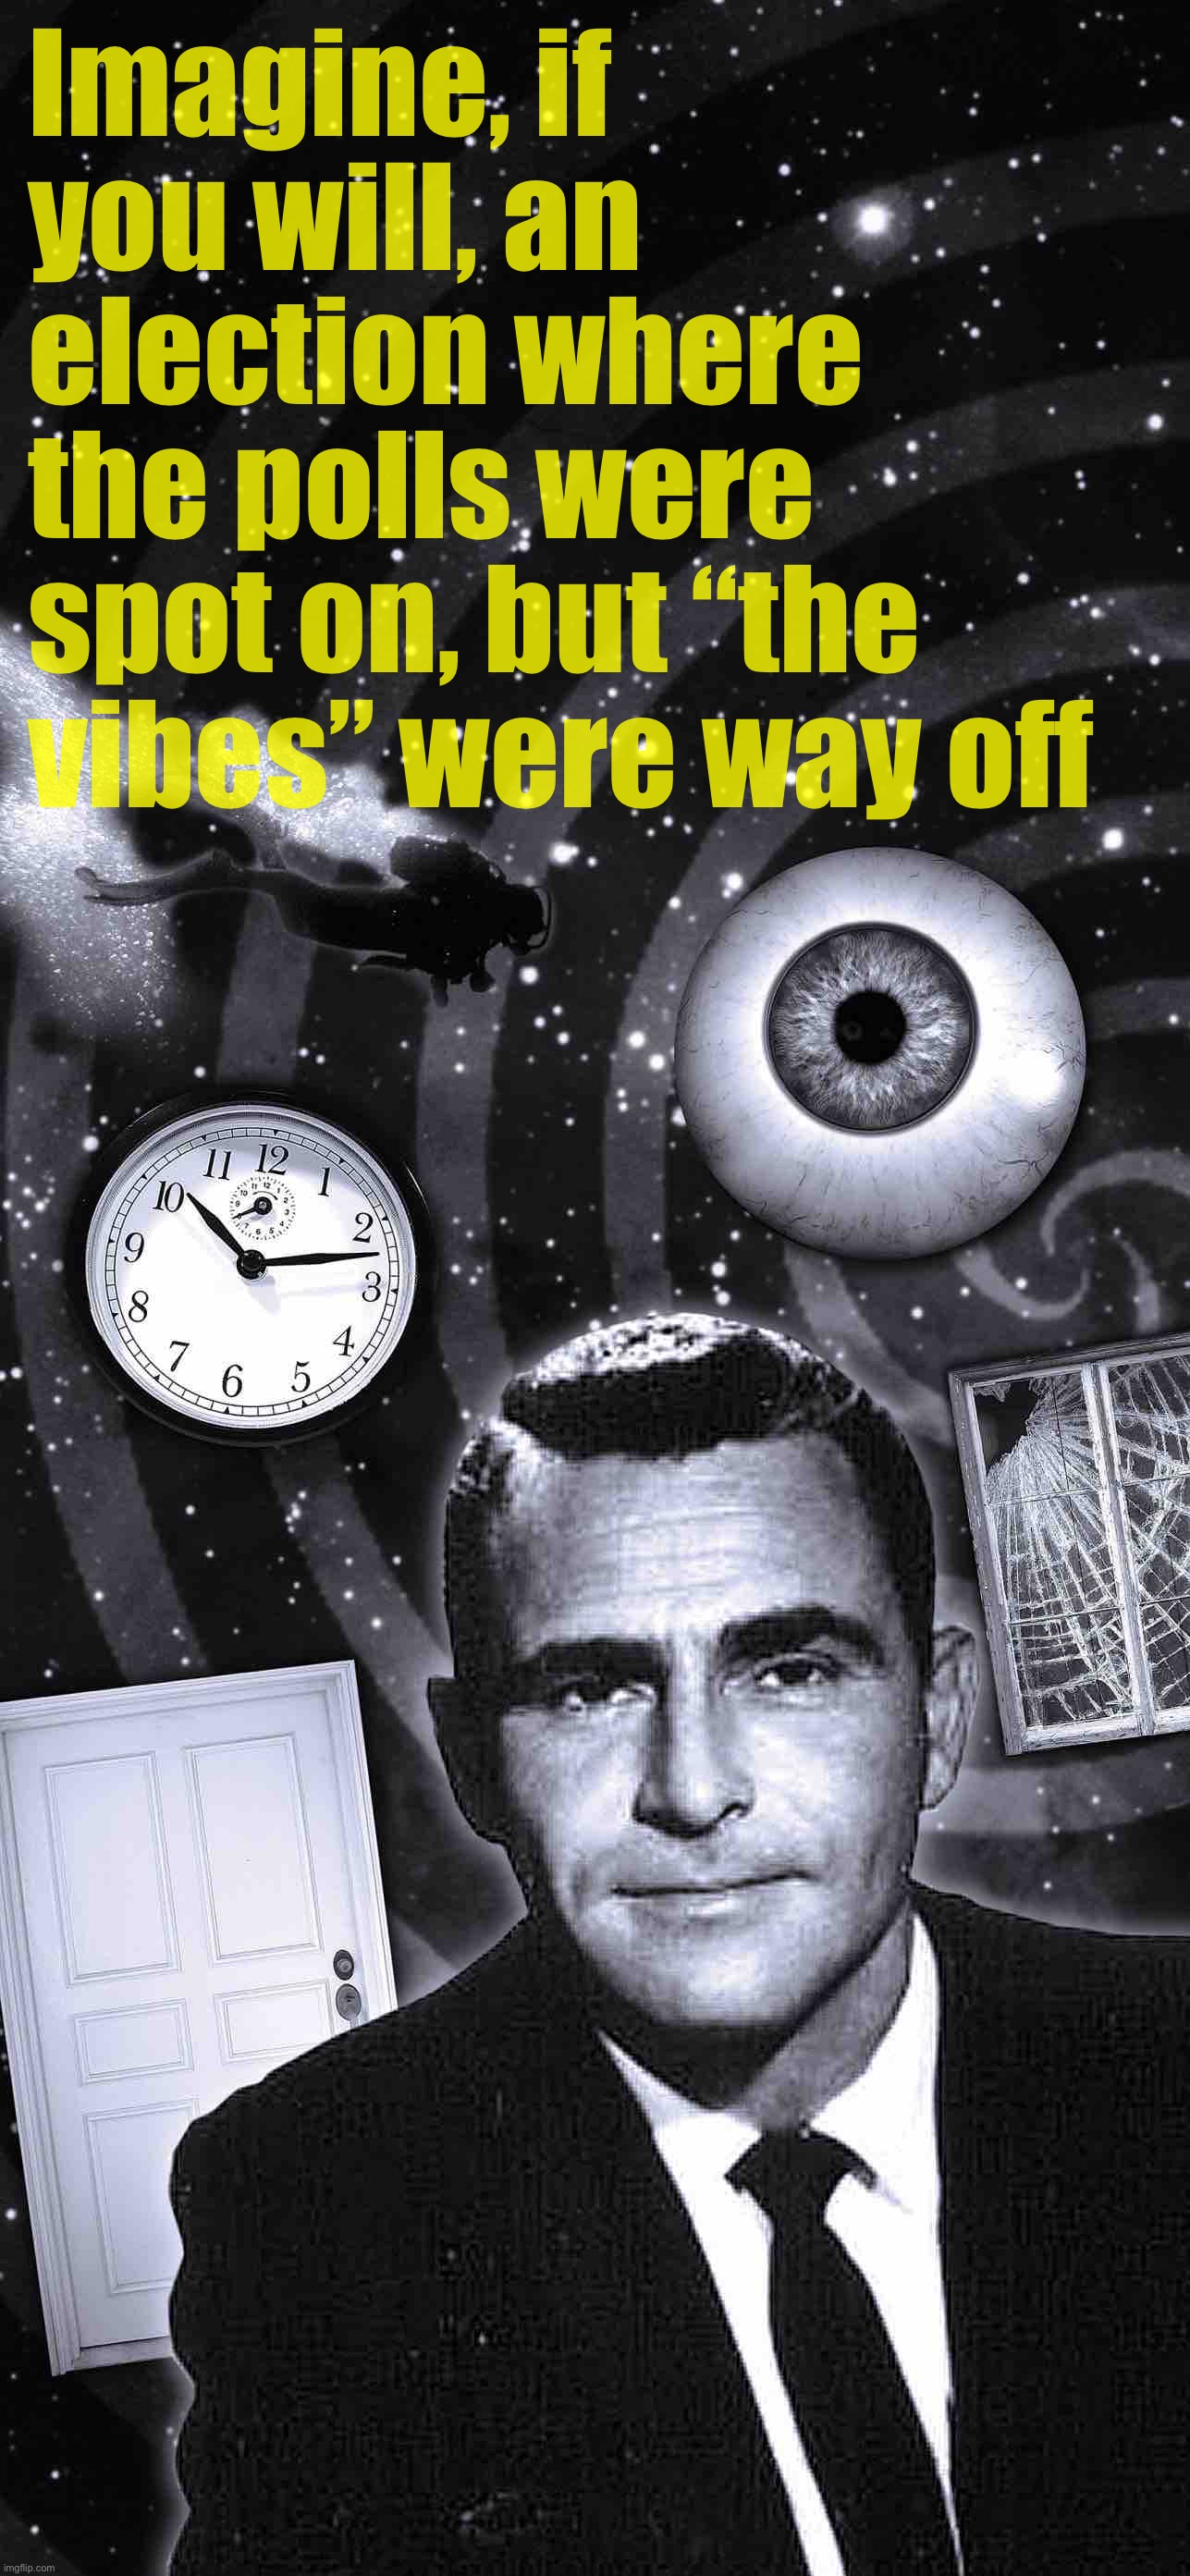 Vibes said “red wave.” Polls said virtual tie. Nobody believed them. For once, the polls had it. | Imagine, if you will, an election where the polls were spot on, but “the vibes” were way off | image tagged in twilight zone | made w/ Imgflip meme maker